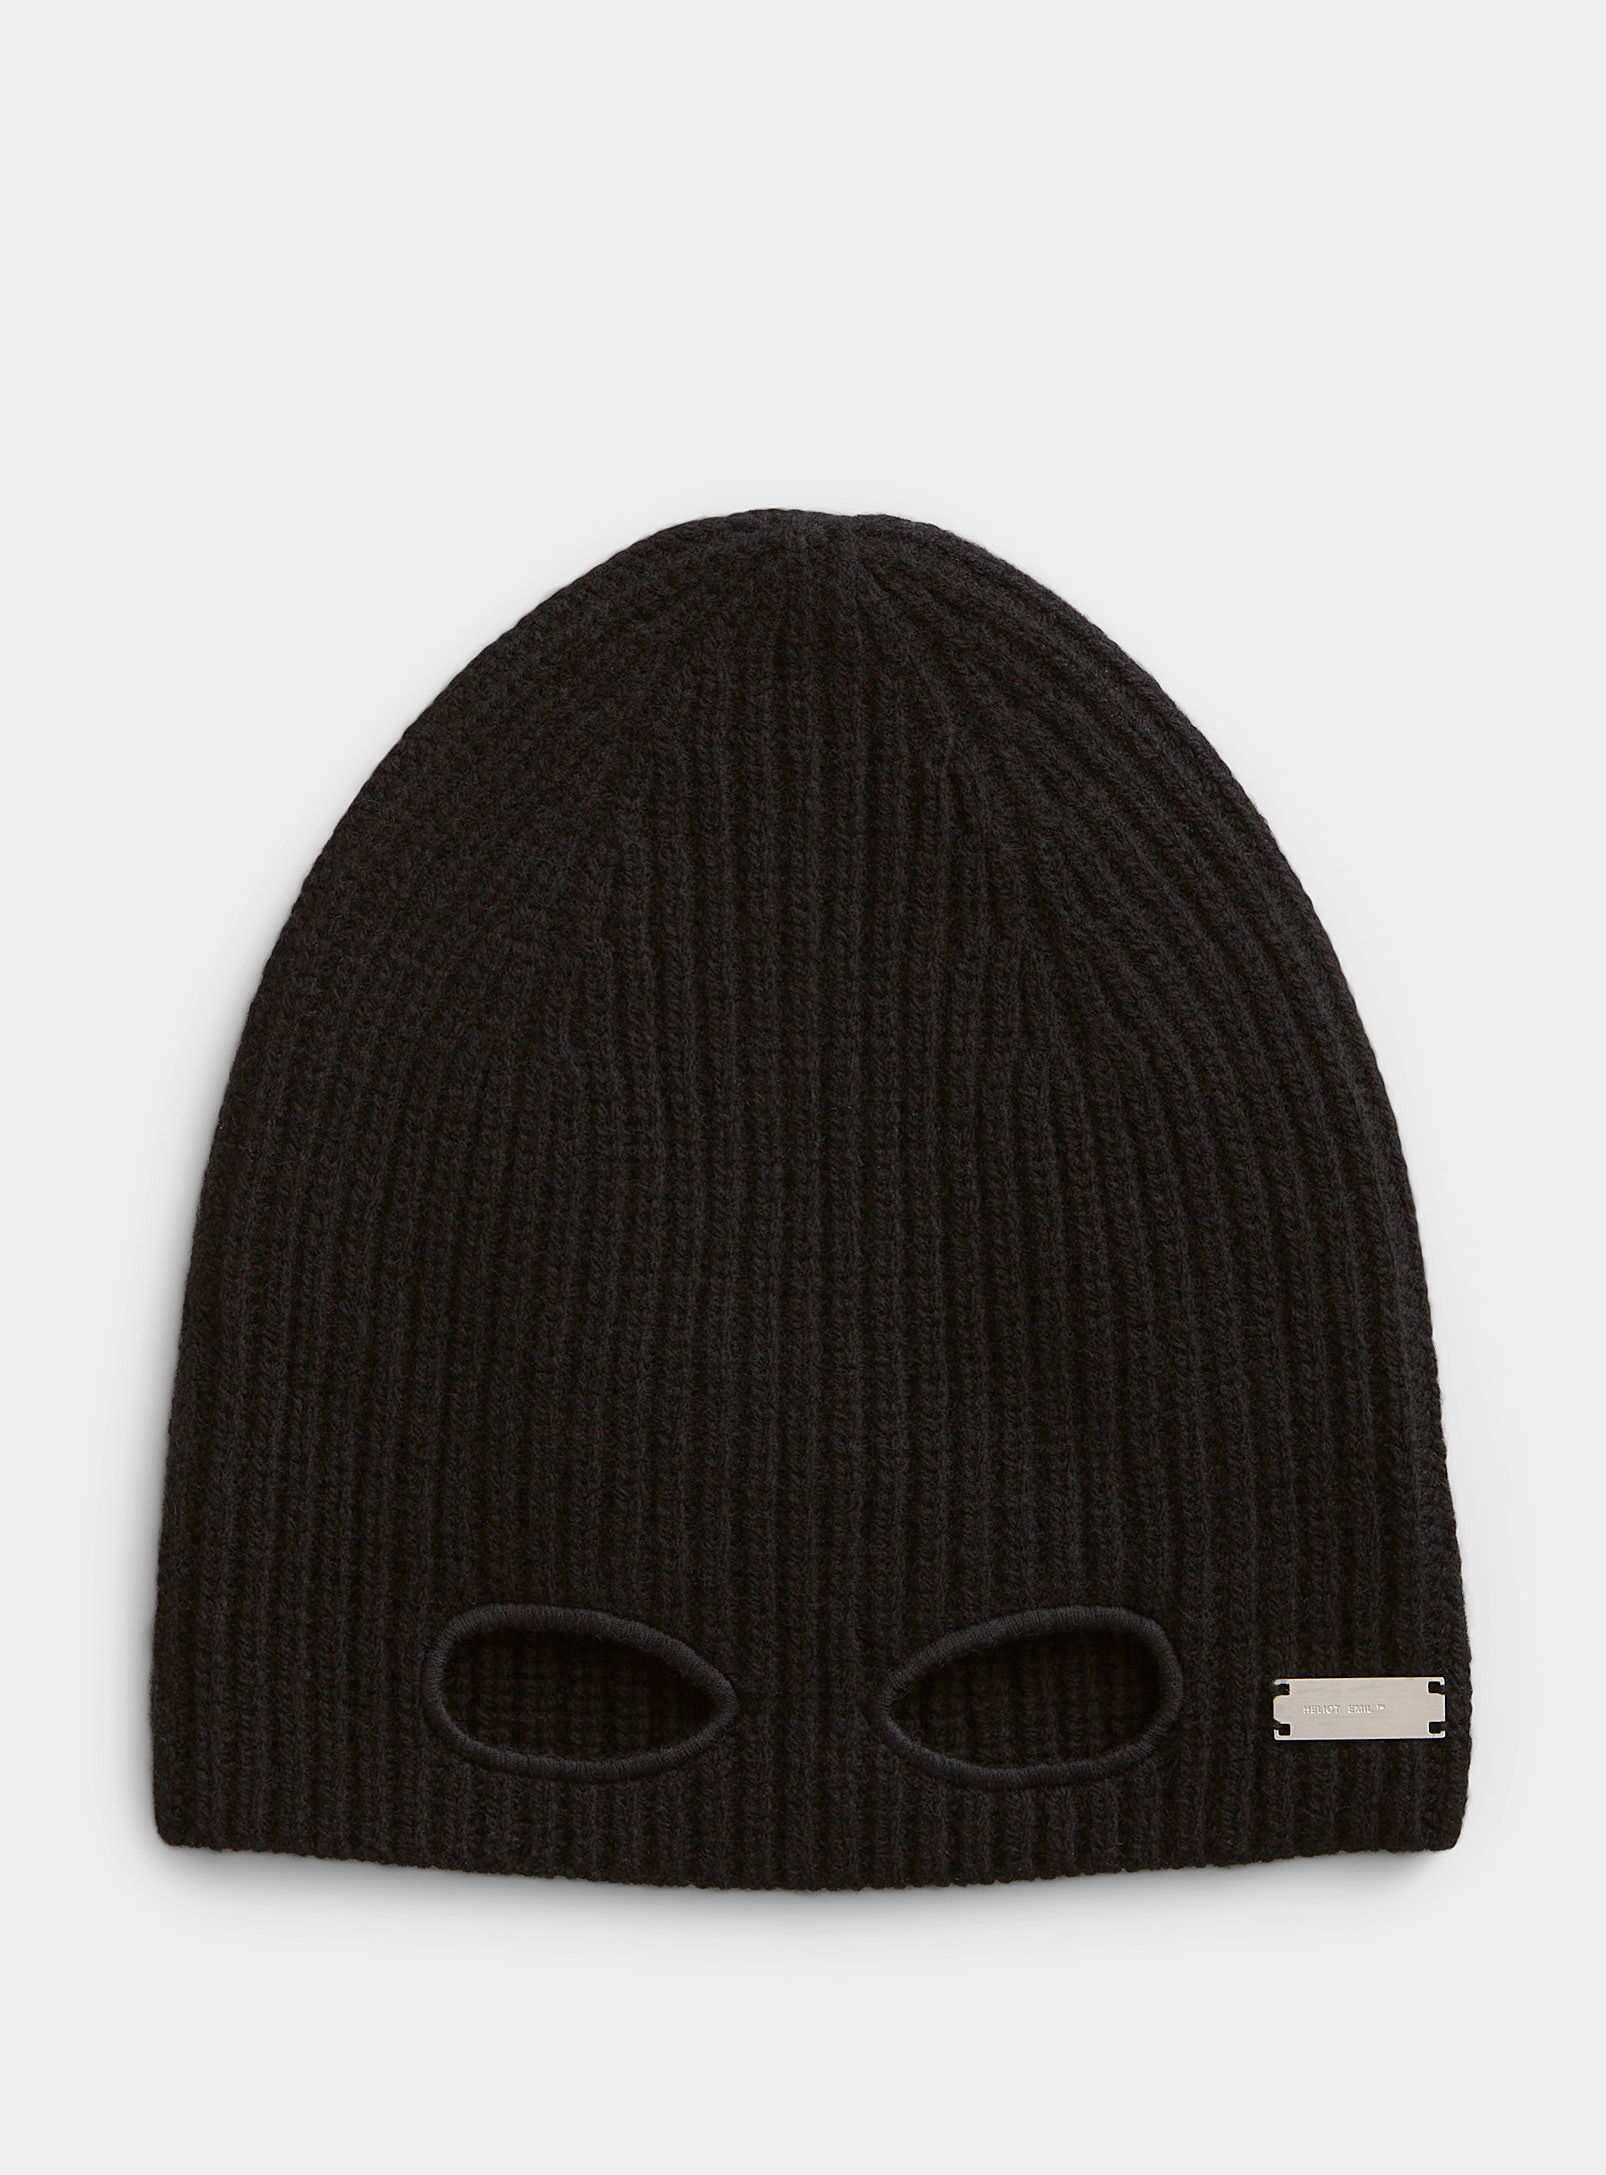 HELIOT EMIL RELIEF EYE OPENING RIBBED TUQUE